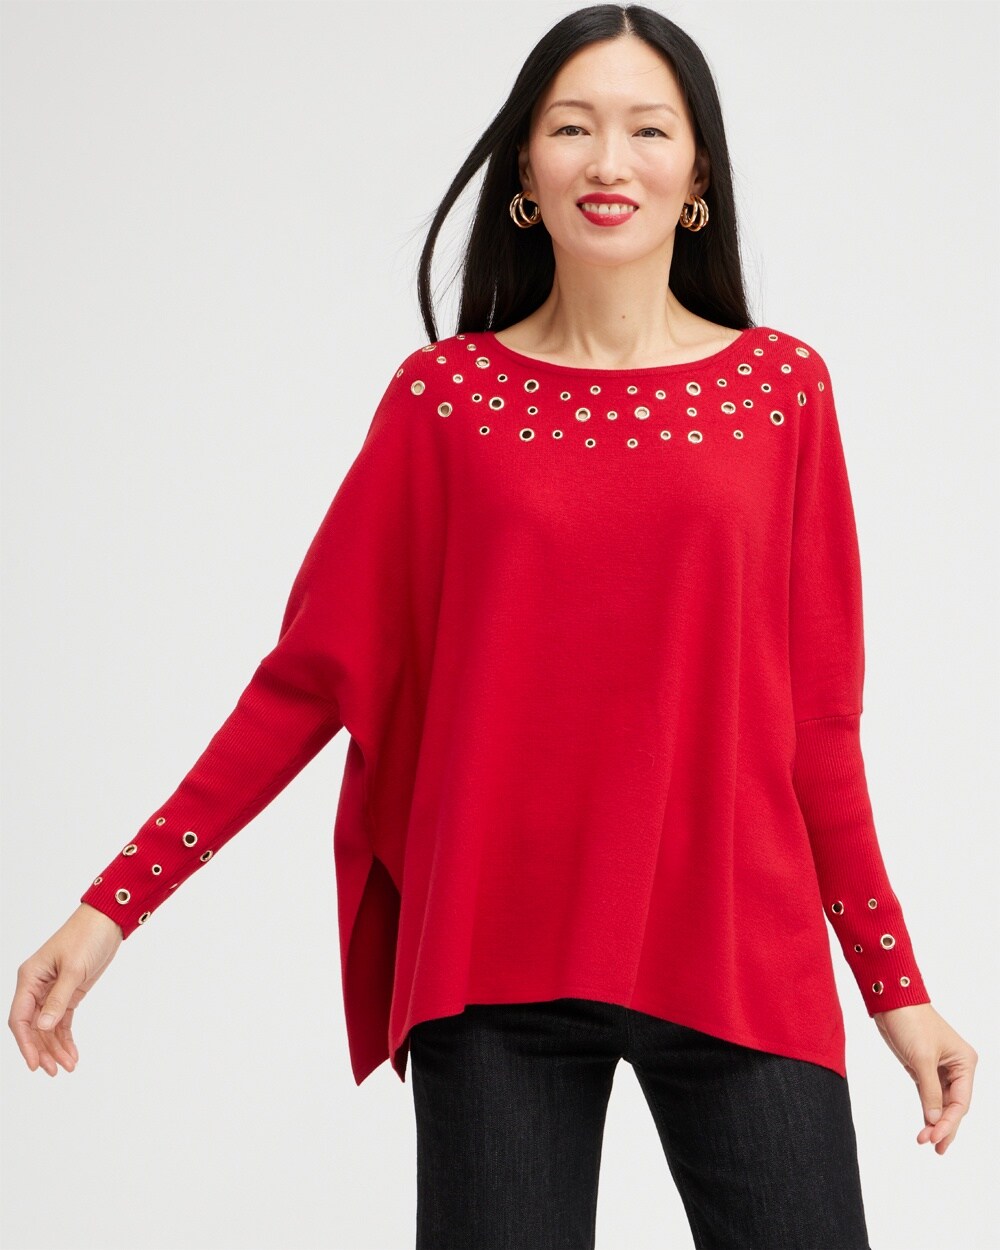 Grommet Detail Sweater Poncho